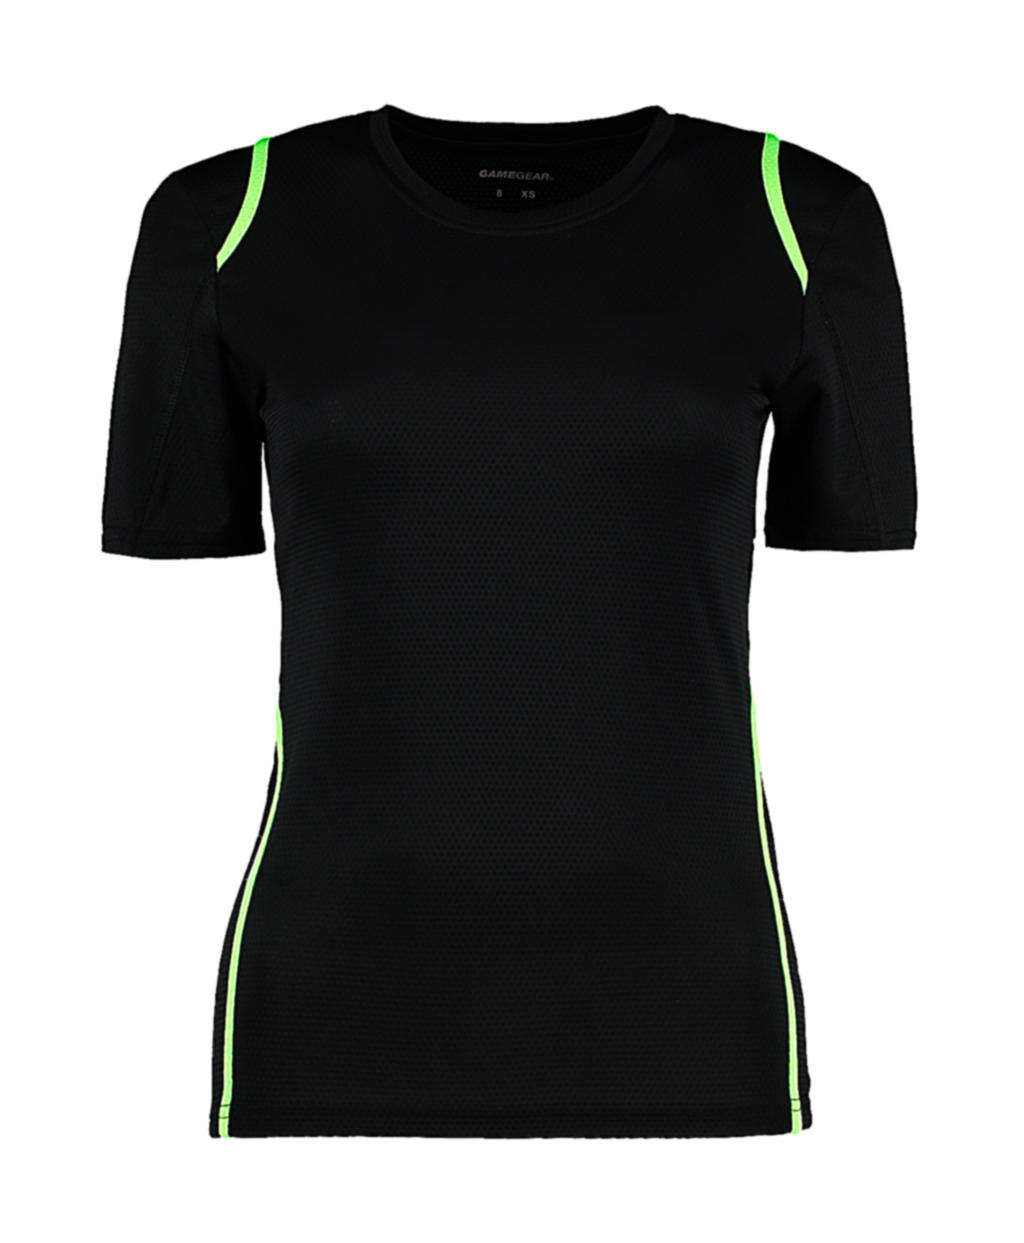  Womens Regular Fit Cooltex? Contrast Tee in Farbe Black/Fluorescent Lime